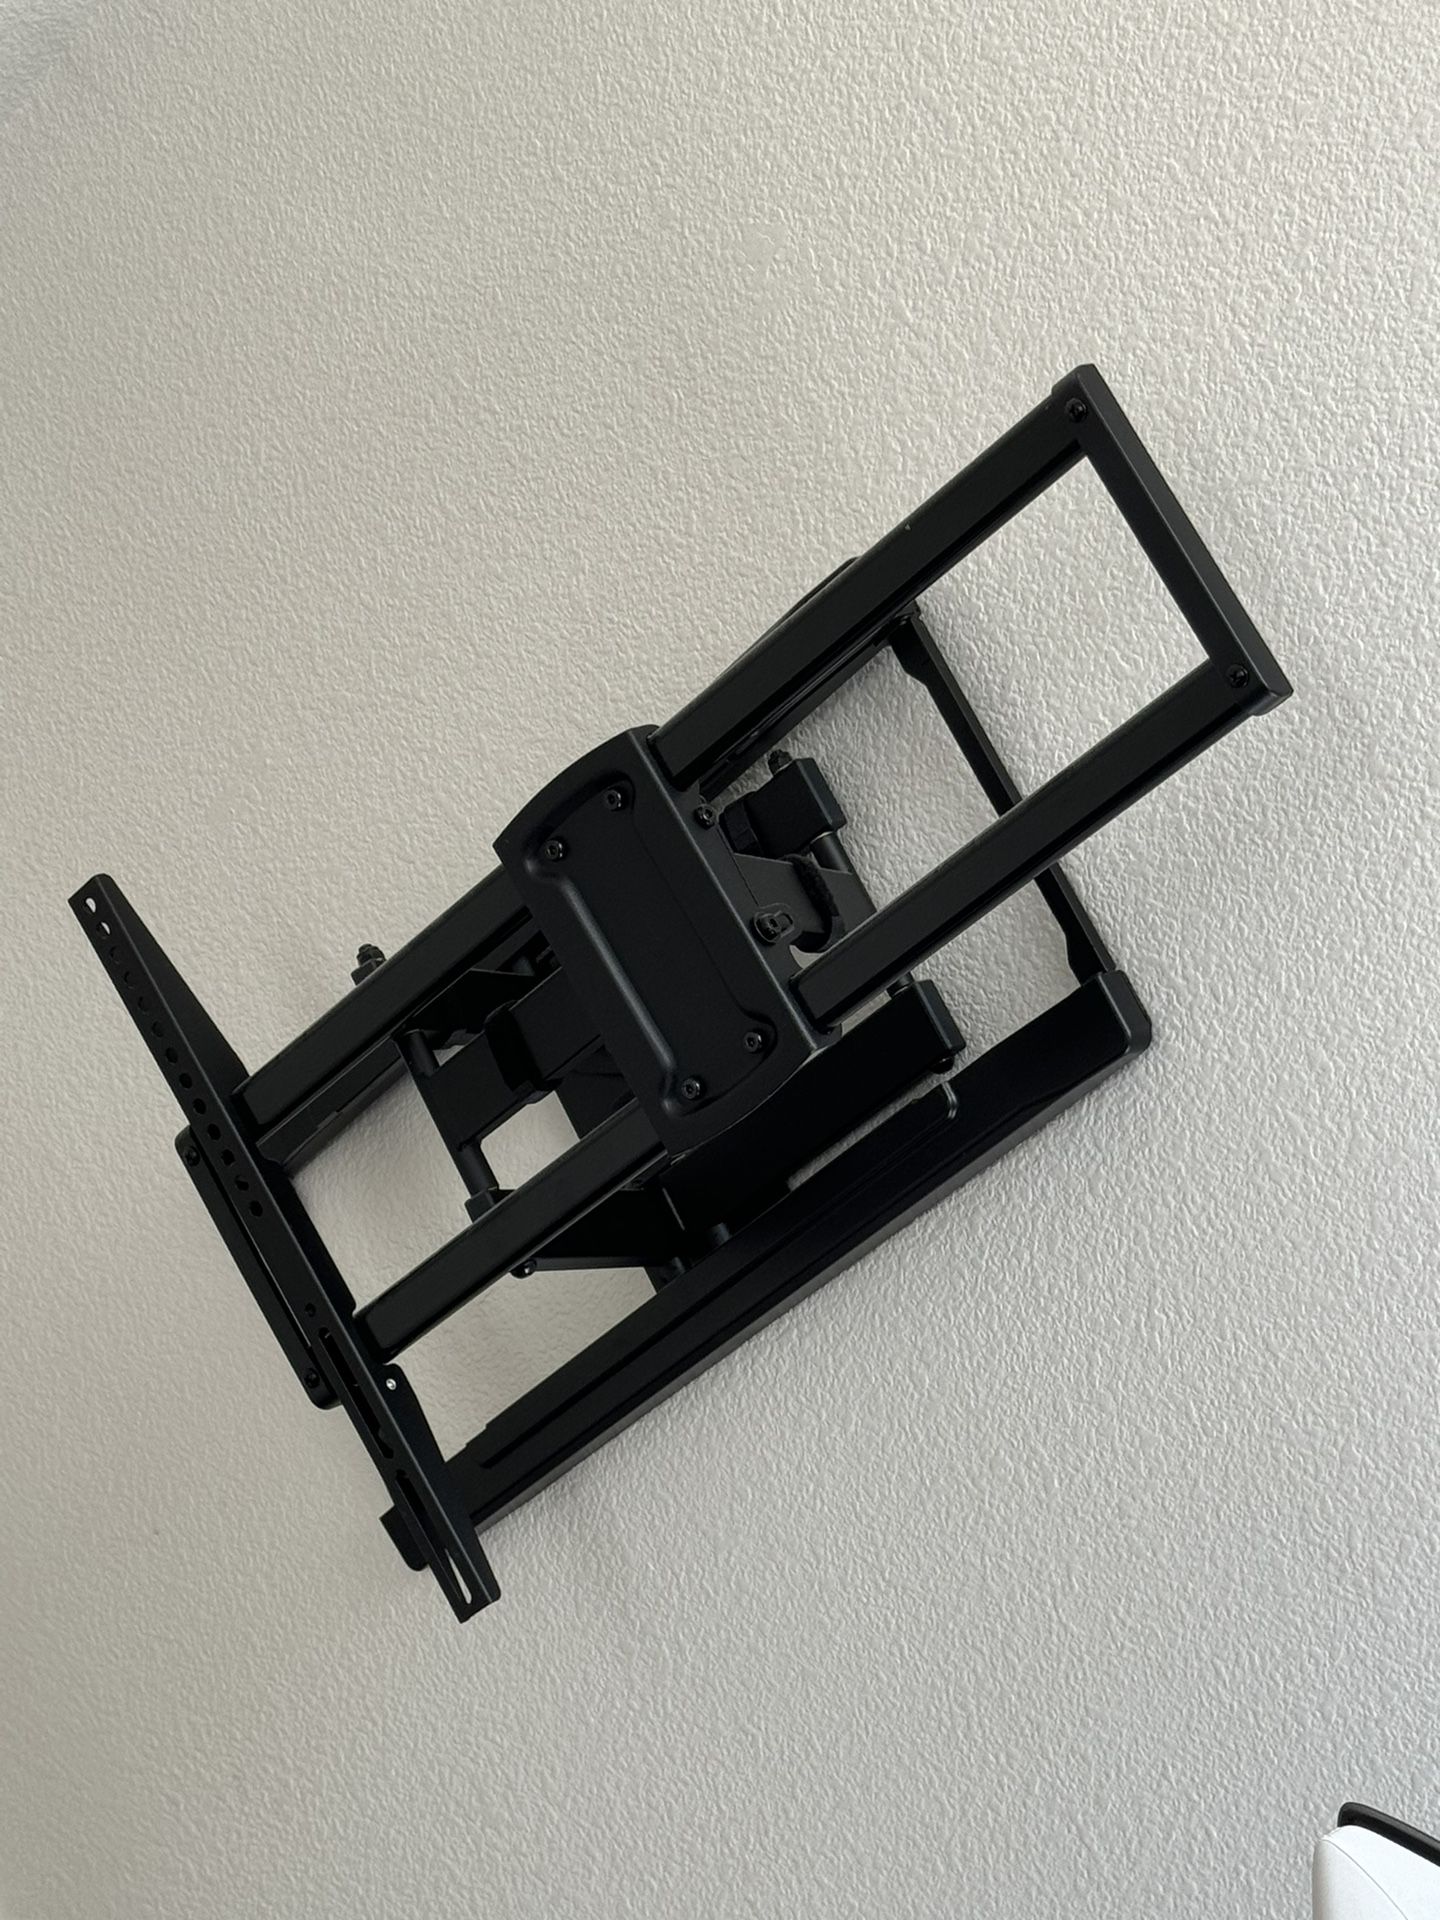 Tv Mount For A 55 Inch Tv 